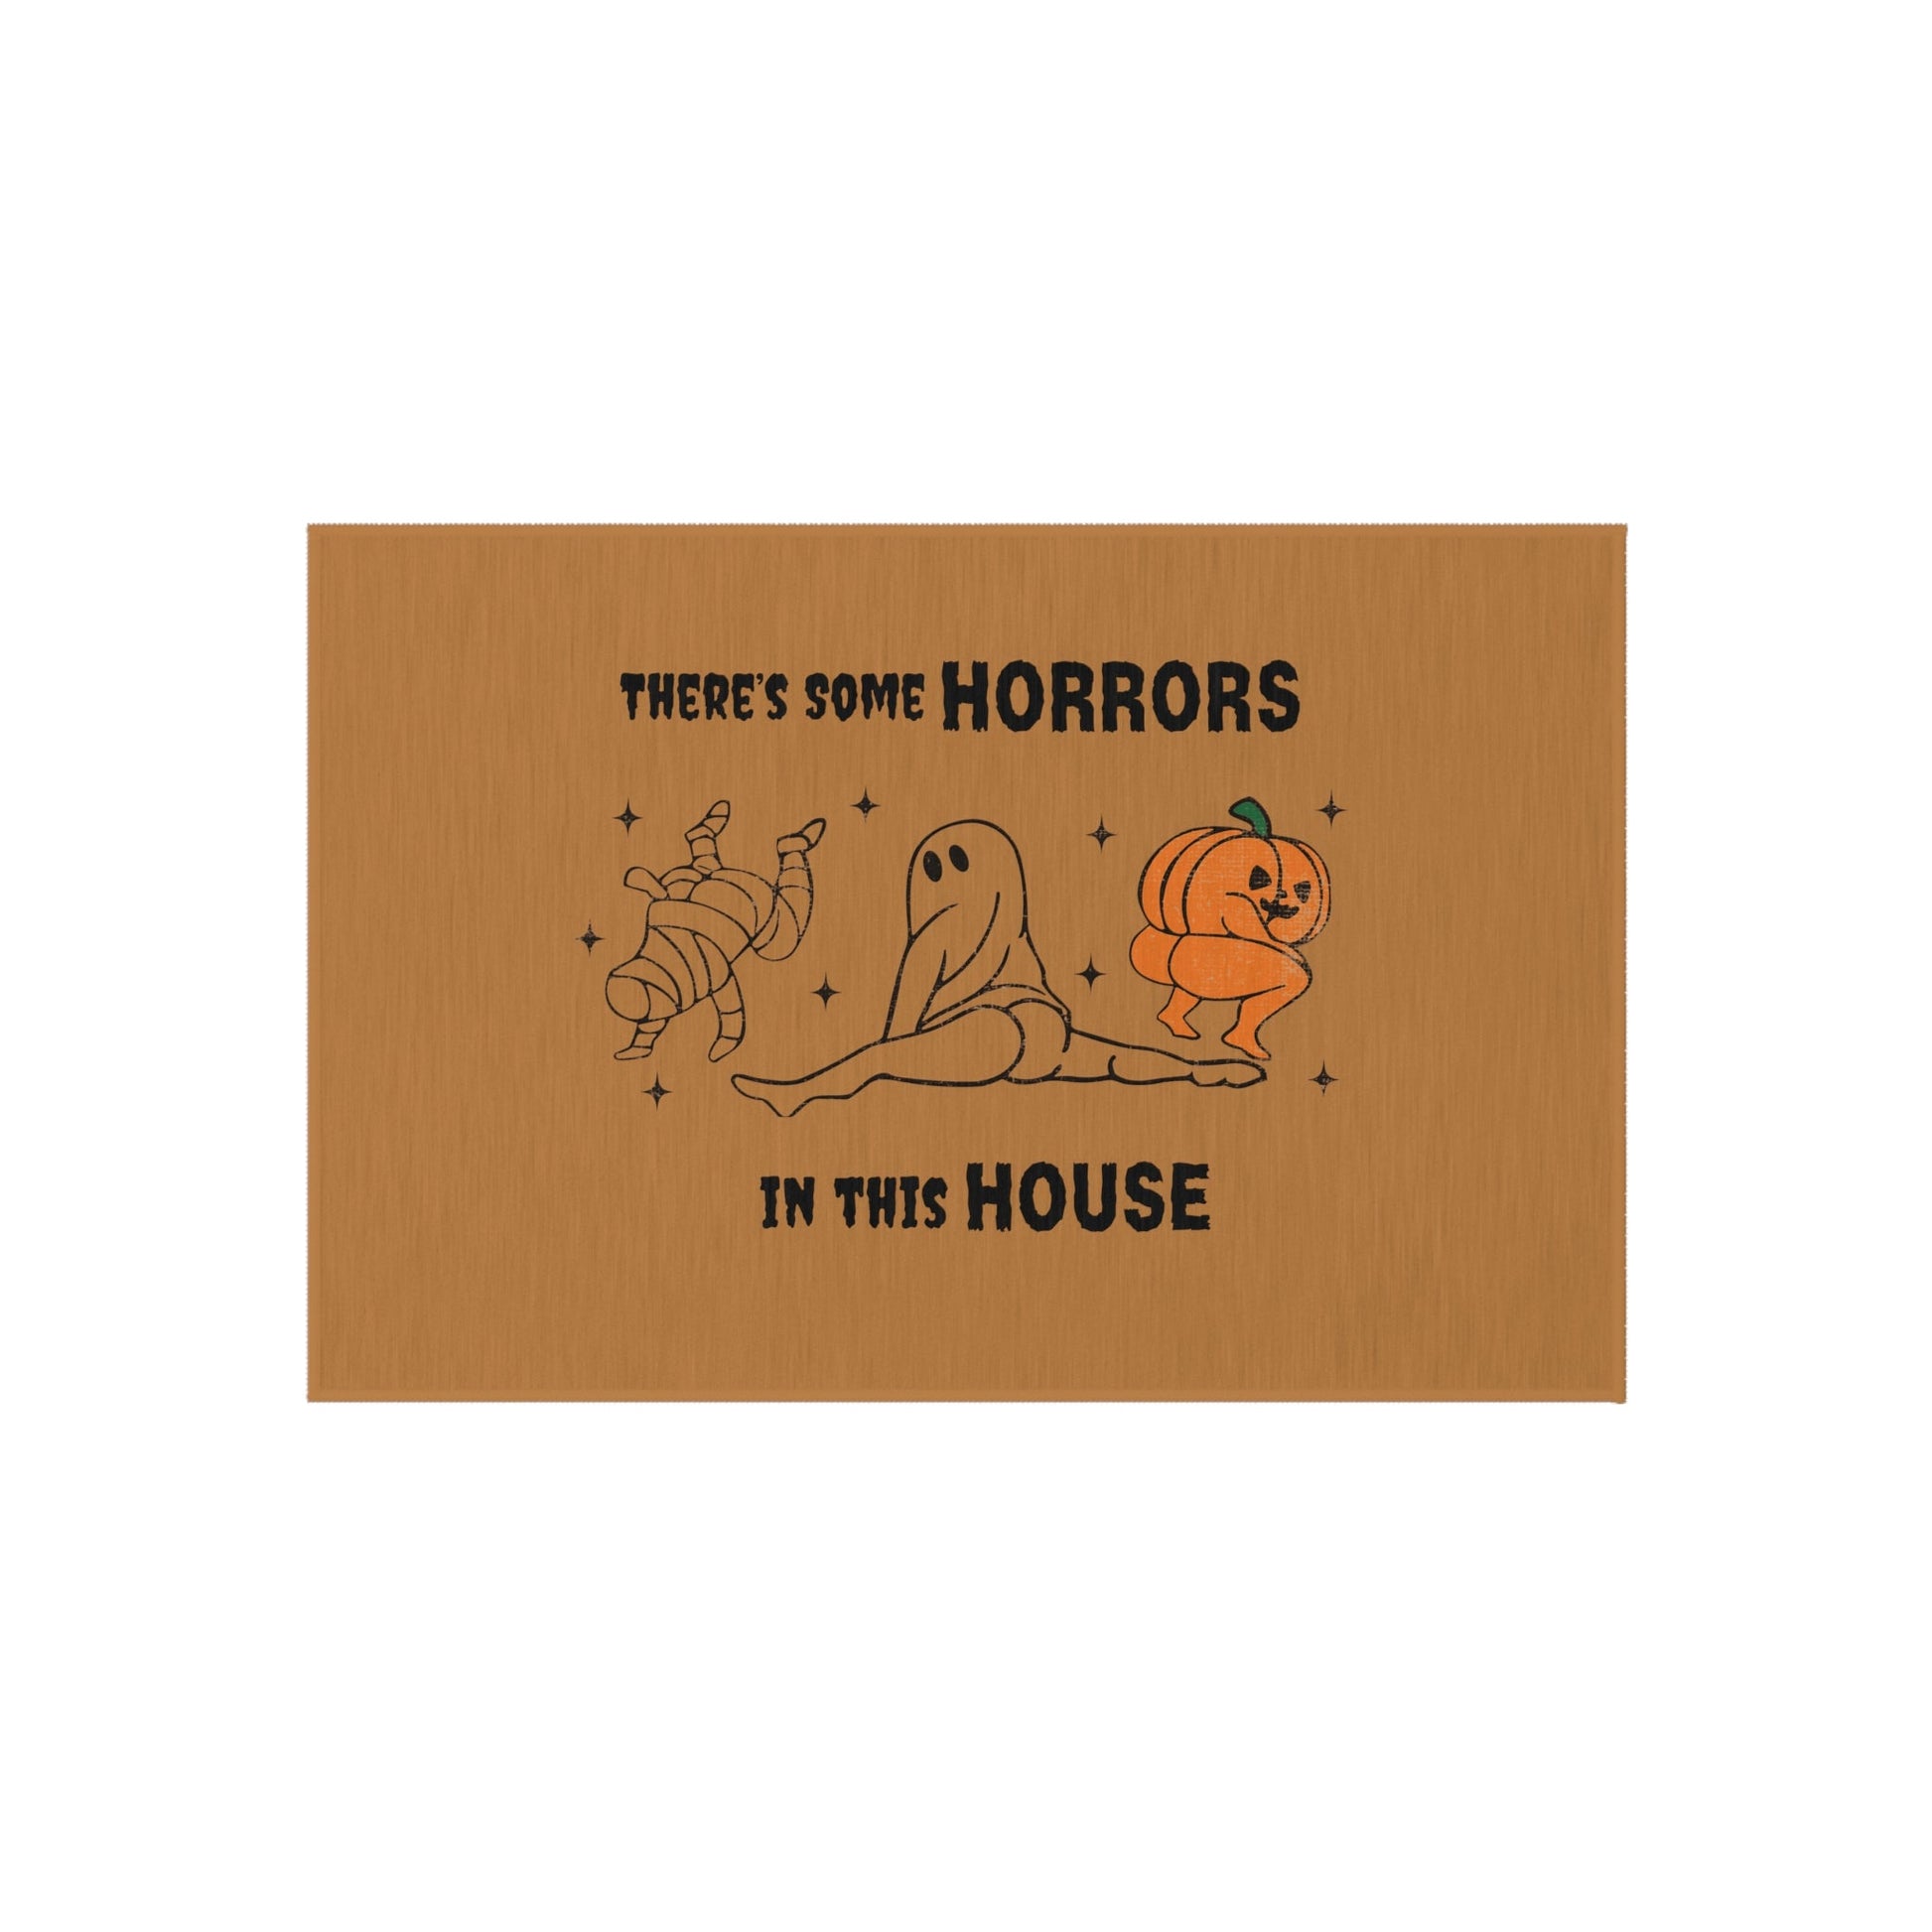 Get trendy with There's Some Horrors in this House Outdoor Rug - Home Decor available at Good Gift Company. Grab yours for $32 today!